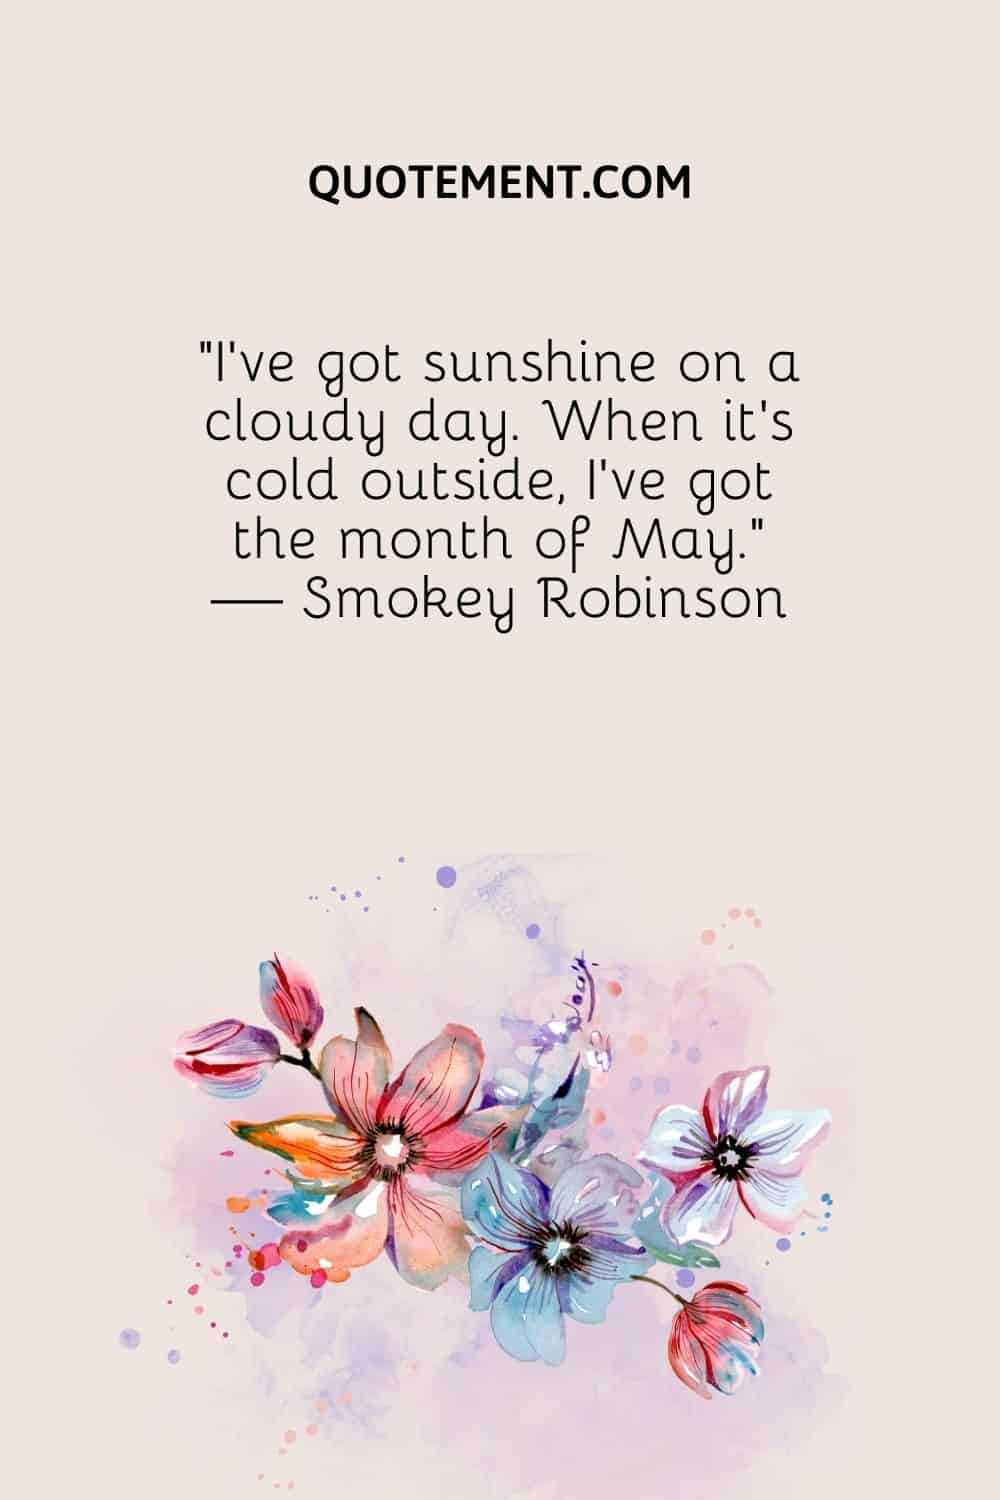 “I’ve got sunshine on a cloudy day. When it’s cold outside, I’ve got the month of May.” — Smokey Robinson